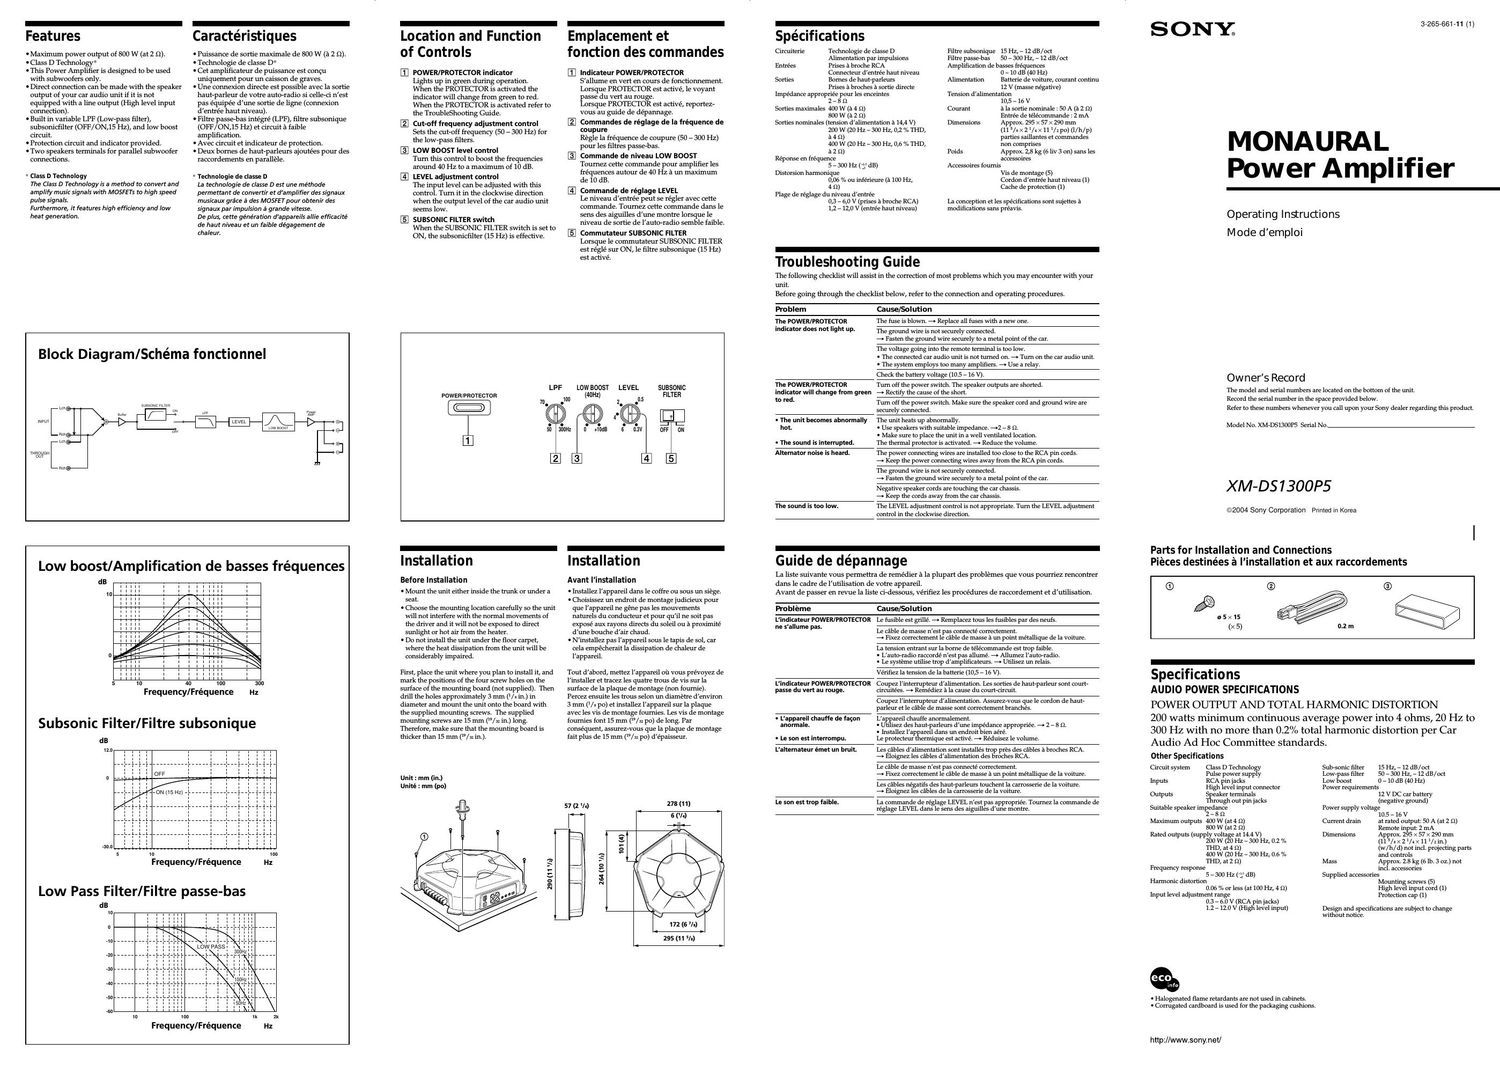 sony xmds 1300 p5 owners manual